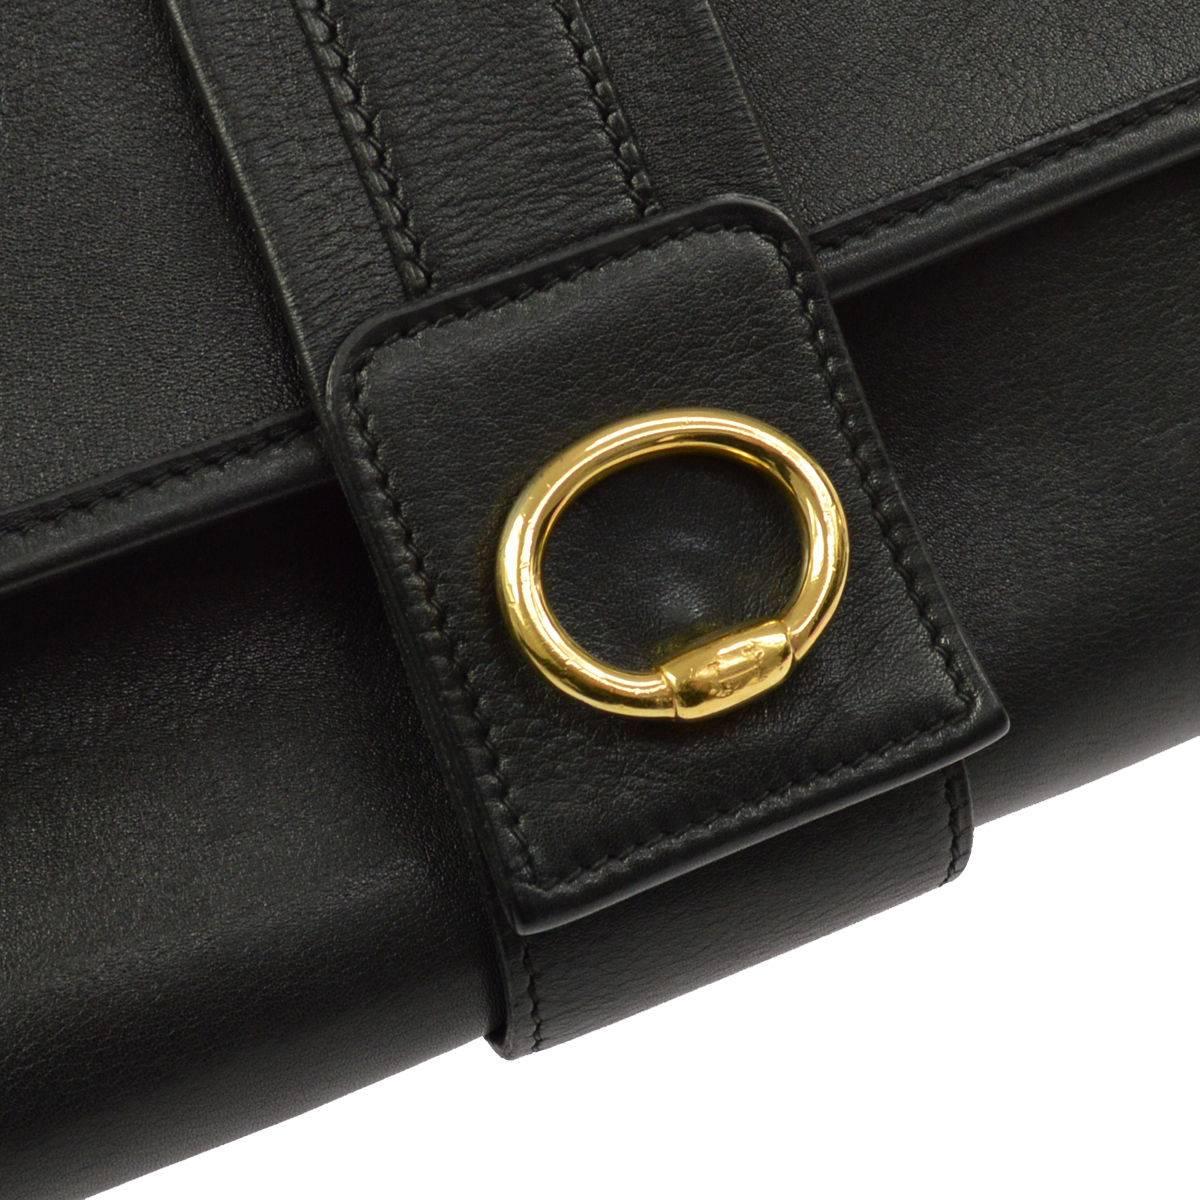 CURATOR'S NOTES

Hermes Black Leather Gold Fold Over Flap Saddle Shoulder Bag with Dust Bag  

Leather
Gold tone hardware
Magnetic flap closure
Leather lining
Made in France
Shoulder strap drop 14"
Measures 13.5" W x 8.25" H x